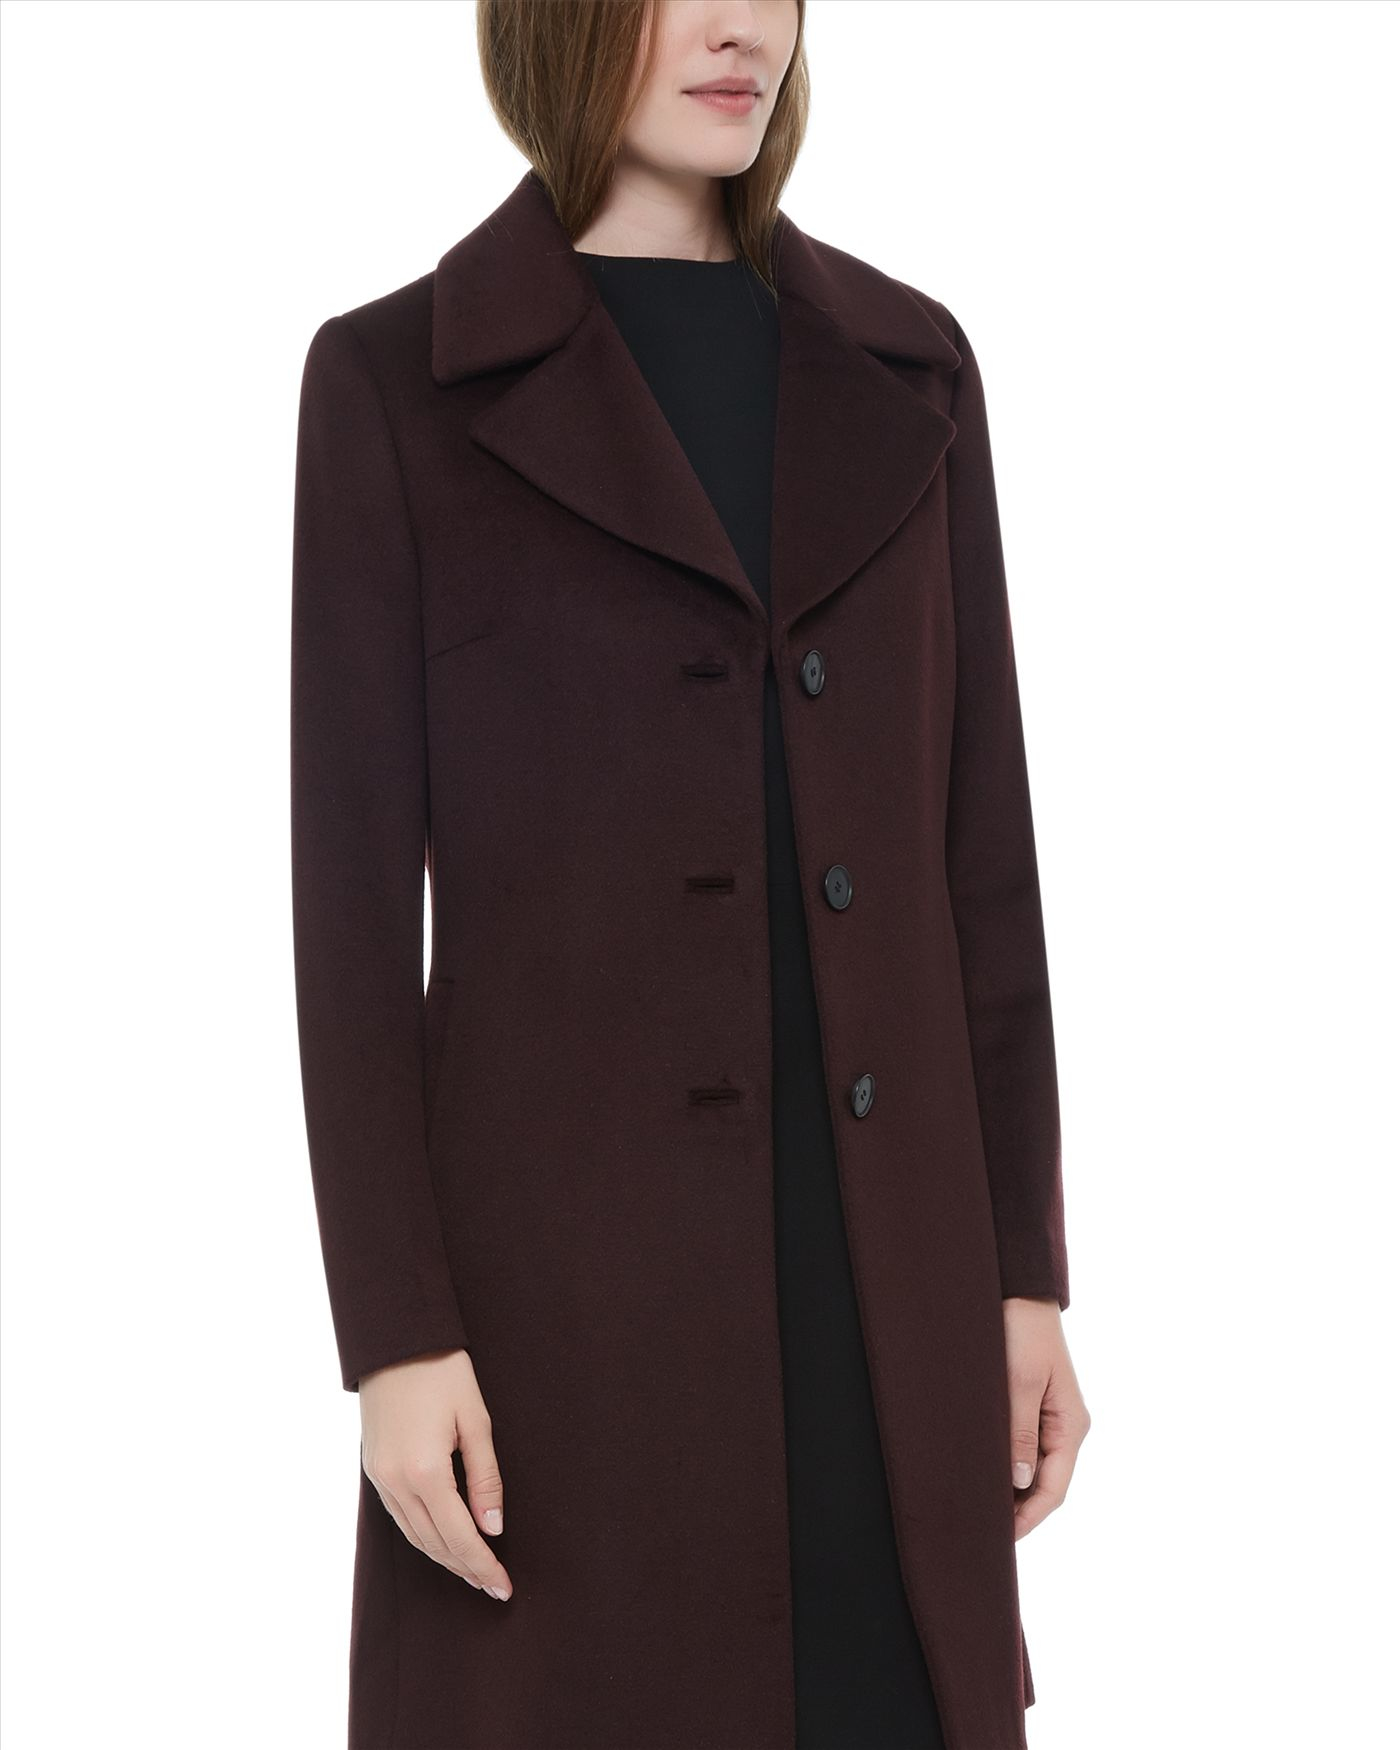 Lyst - Jaeger Wool Three-button Coat in Brown